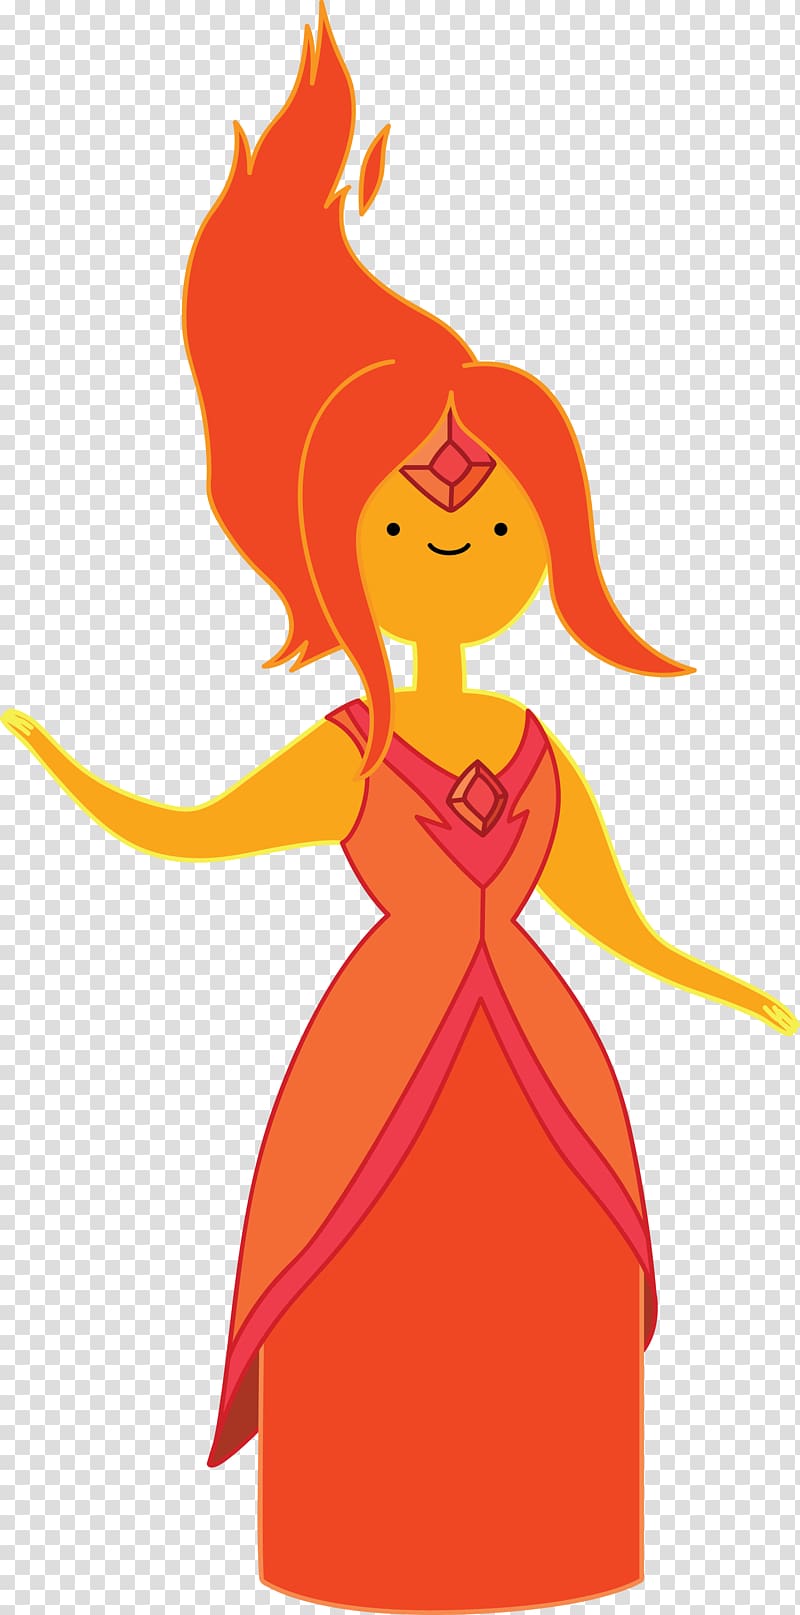 Finn the Human Flame Princess Adventure Time: Explore the Dungeon Because I Don\'t Know! Adventure Time: Finn & Jake Investigations Princess Bubblegum, finn the human transparent background PNG clipart